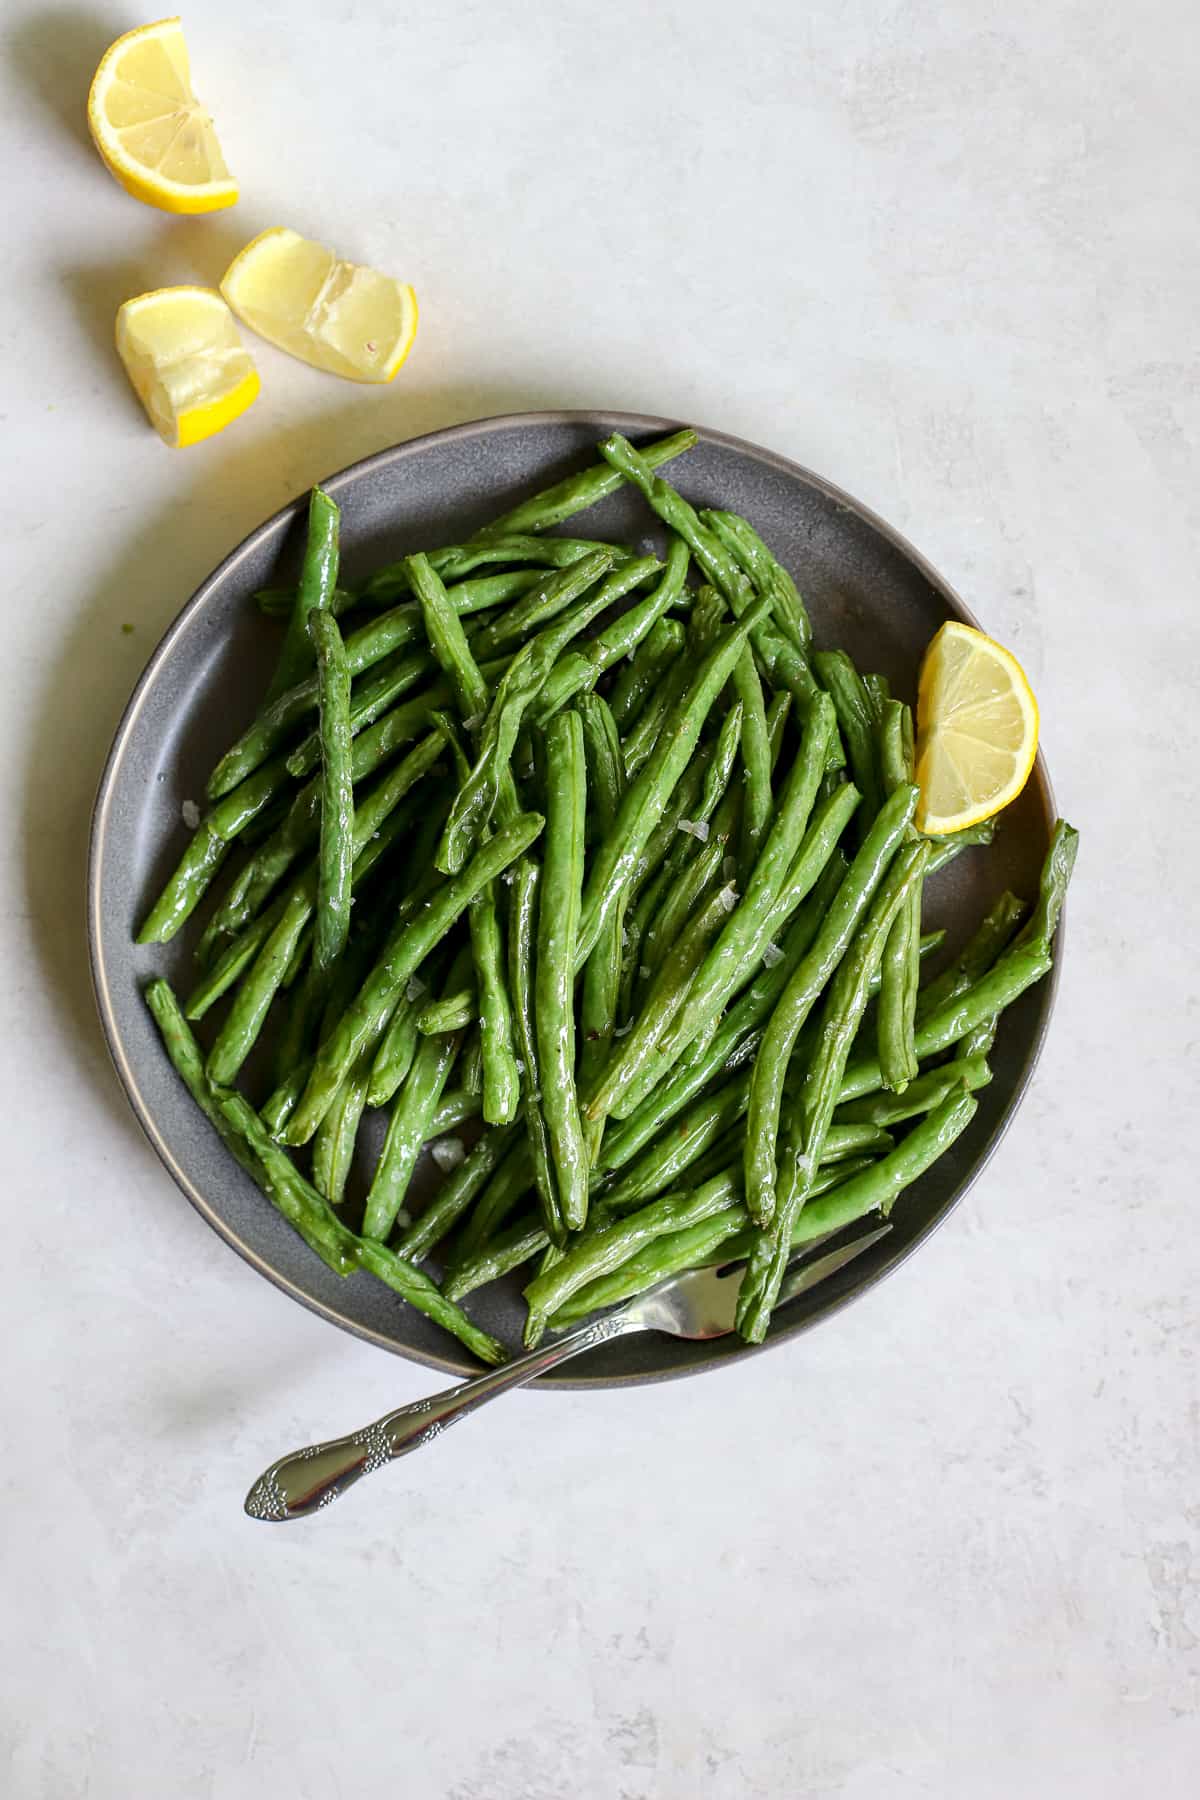 Air fryer green beans on gray plate with lemon wedges, on gray and white surface